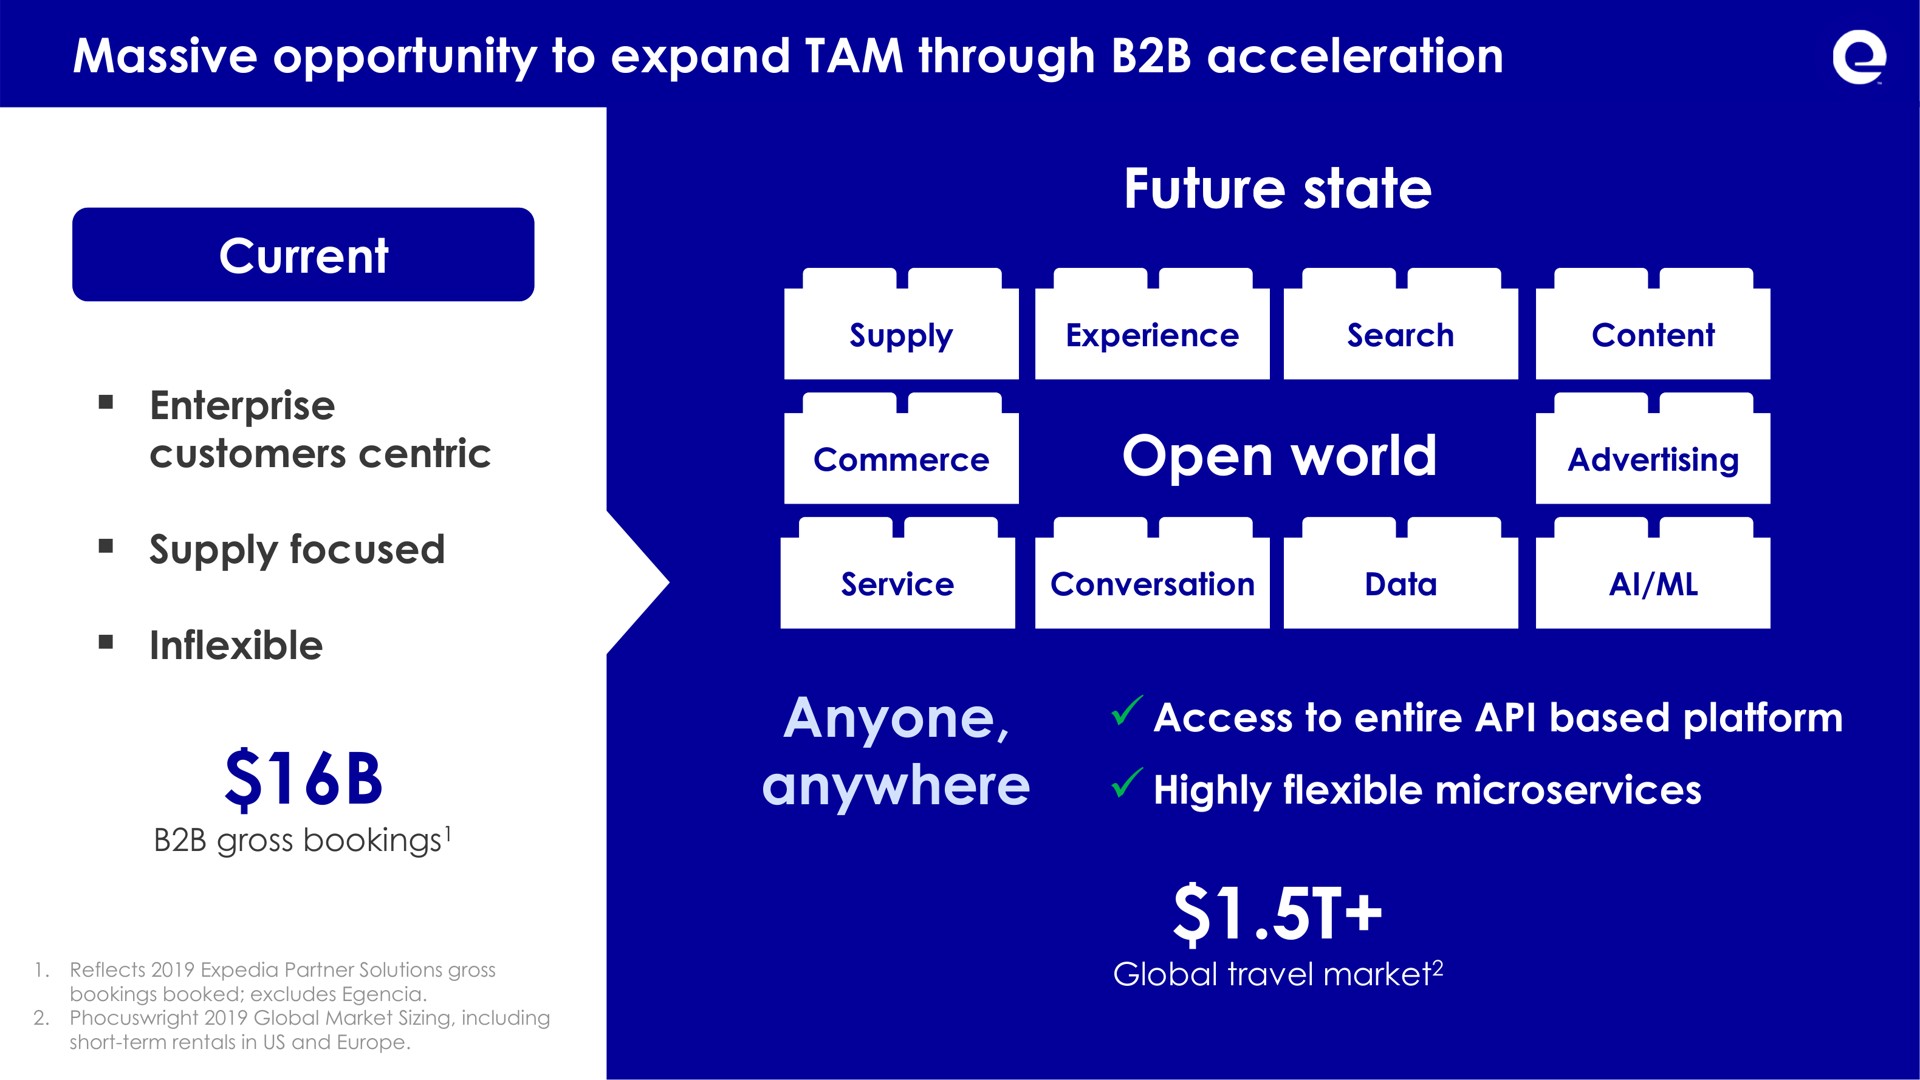 massive opportunity to expand tam through acceleration current current future state future state open world anyone anywhere access entire based platform highly flexible | Expedia